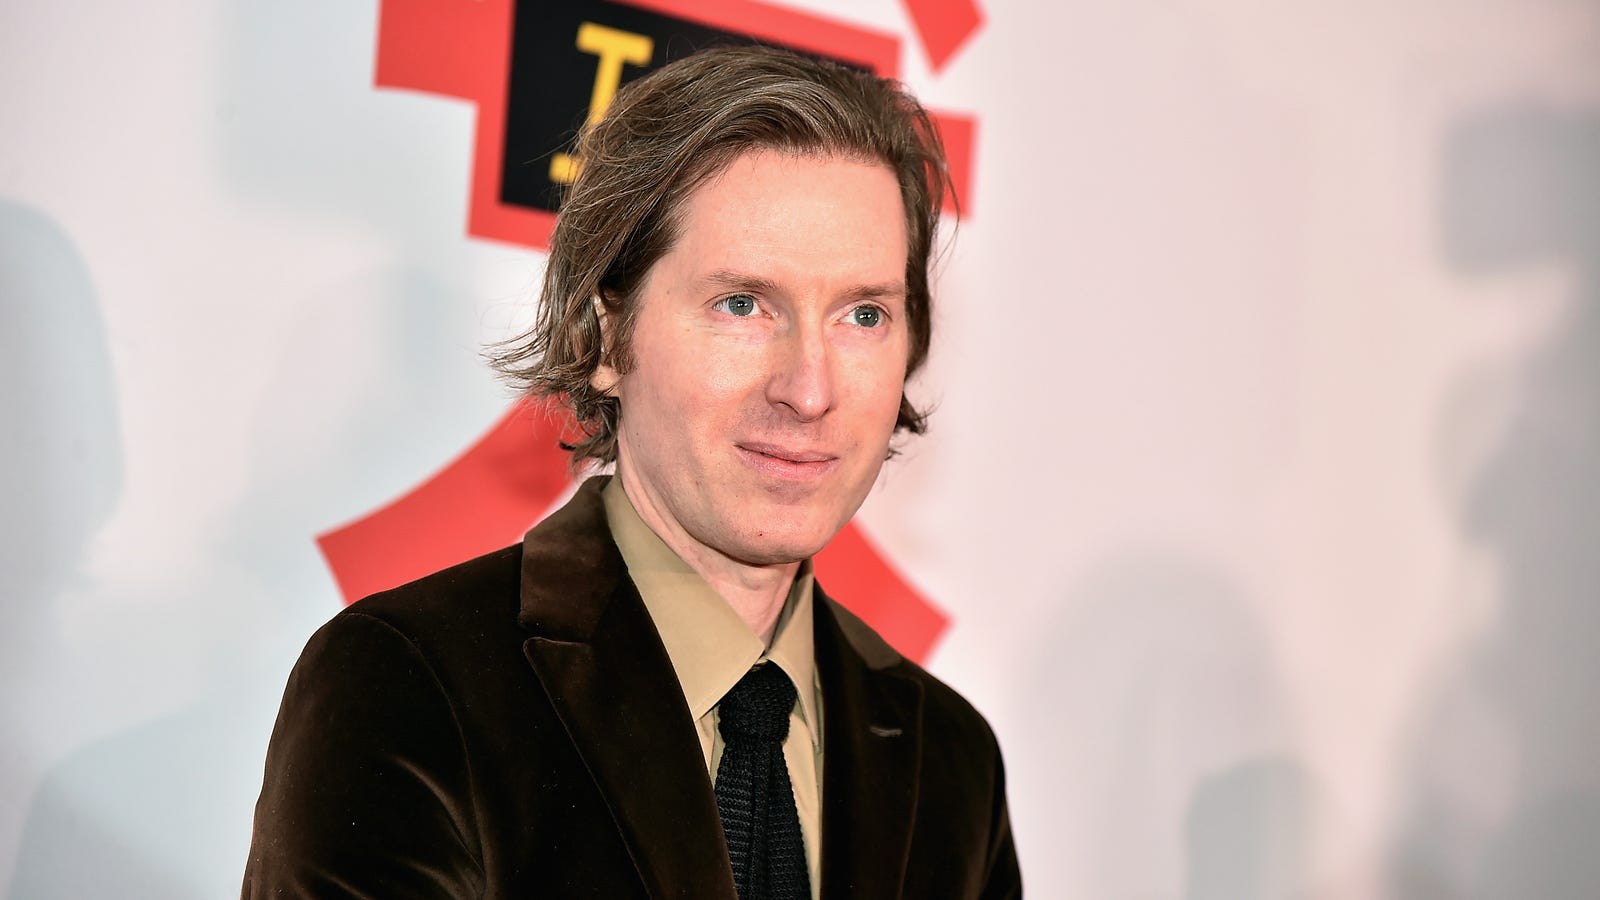 Wes Anderson is making a musical about post-war France, which he somehow hasn't done yet